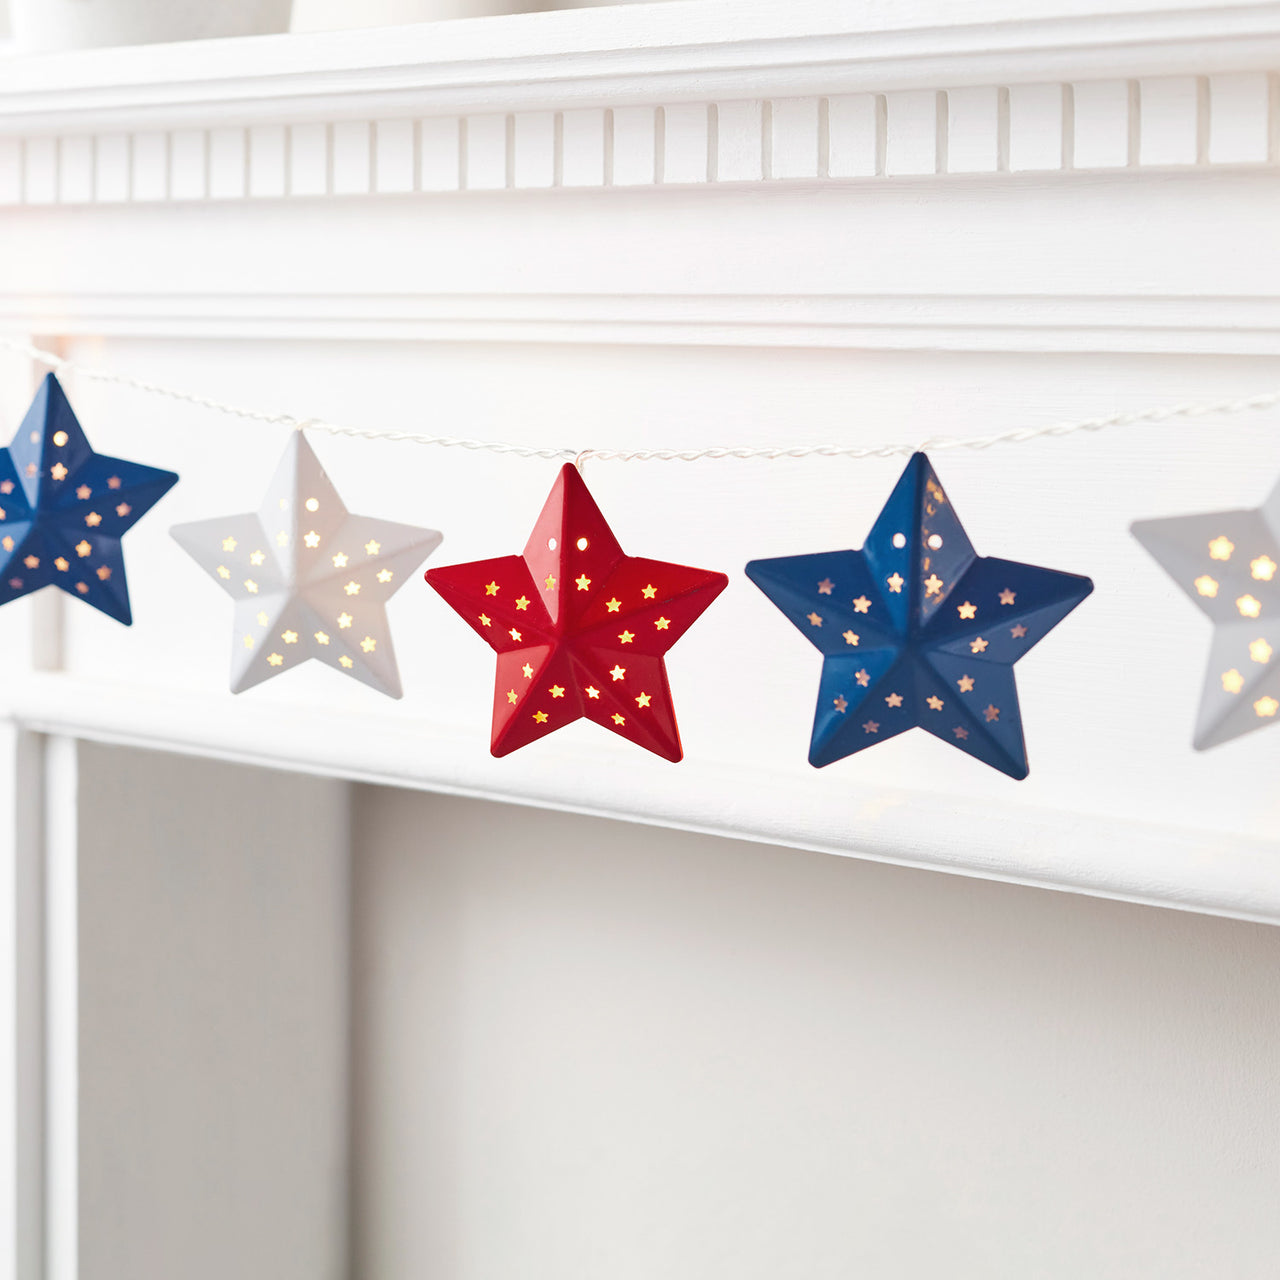 12 Red, White & Blue Metal Star Fairy Lights